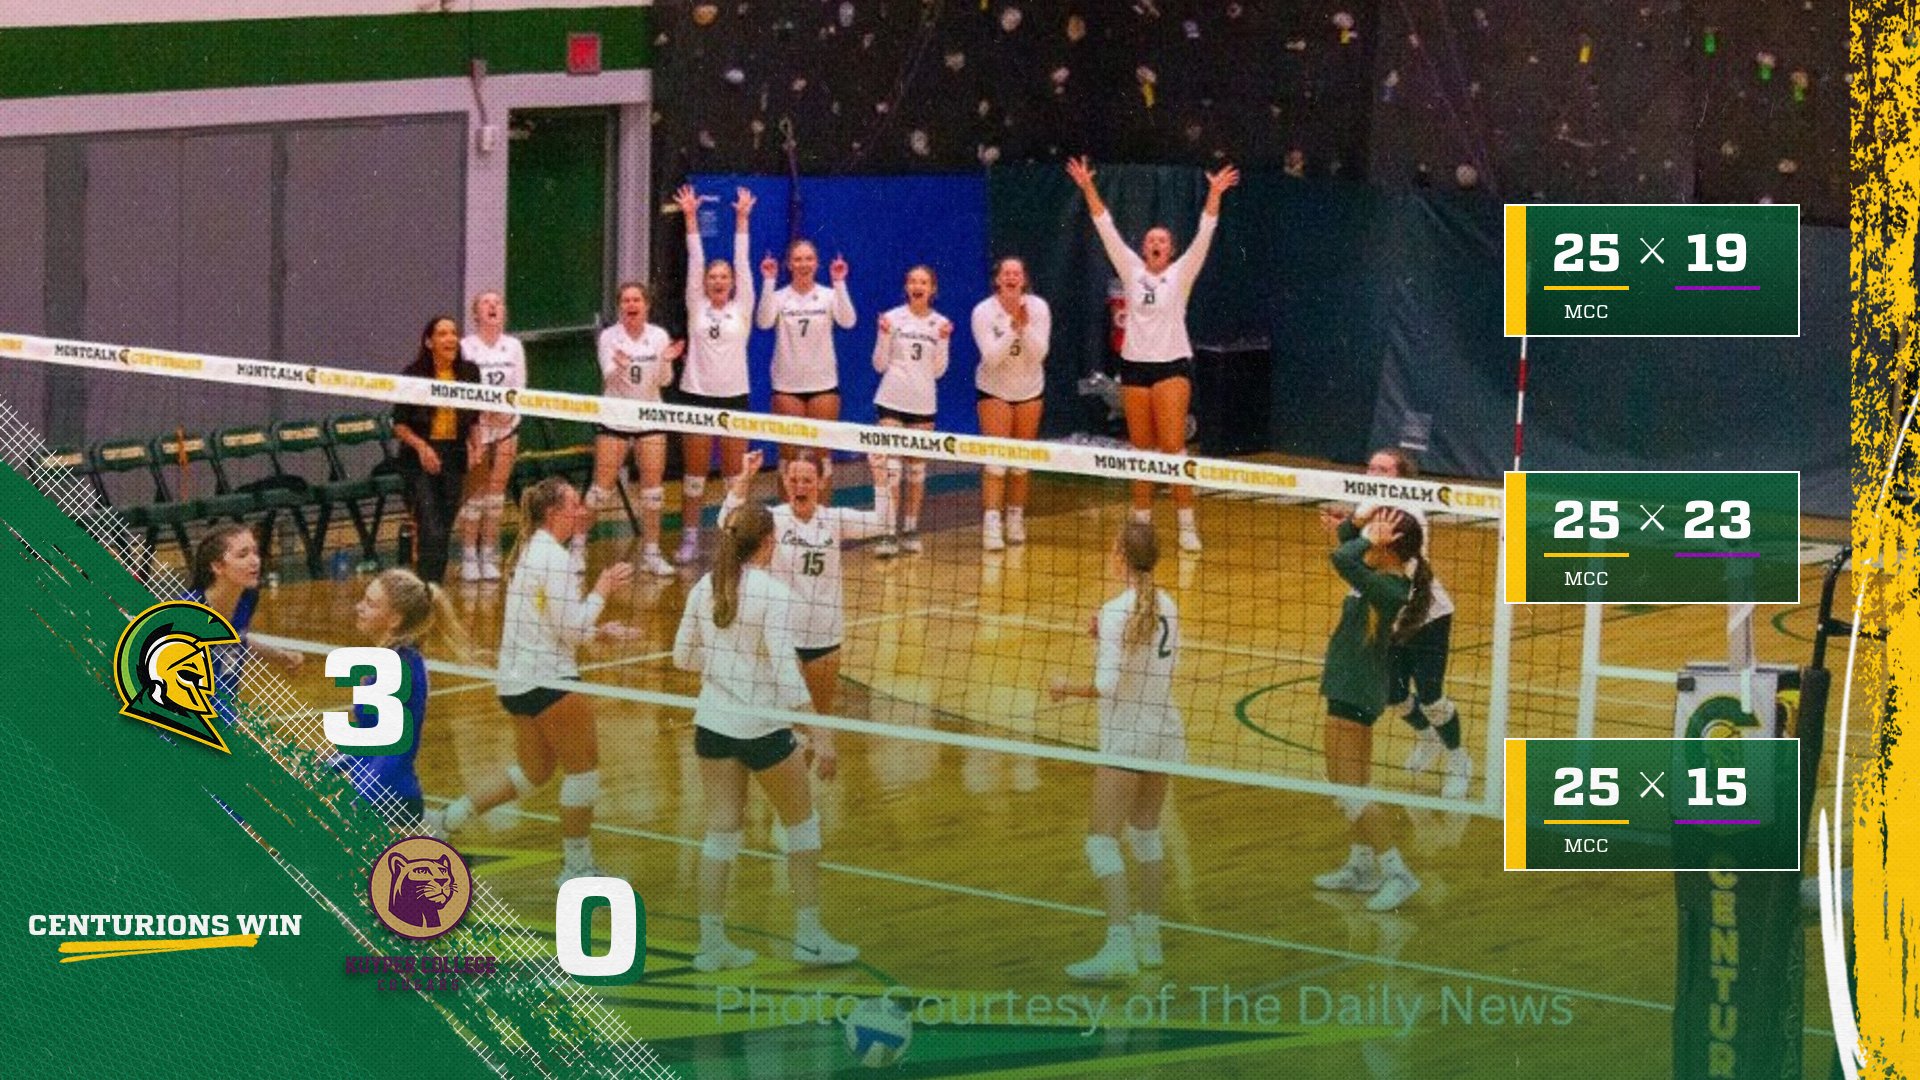 Centurions Sweep the Cougars, improve to 3-5 overall